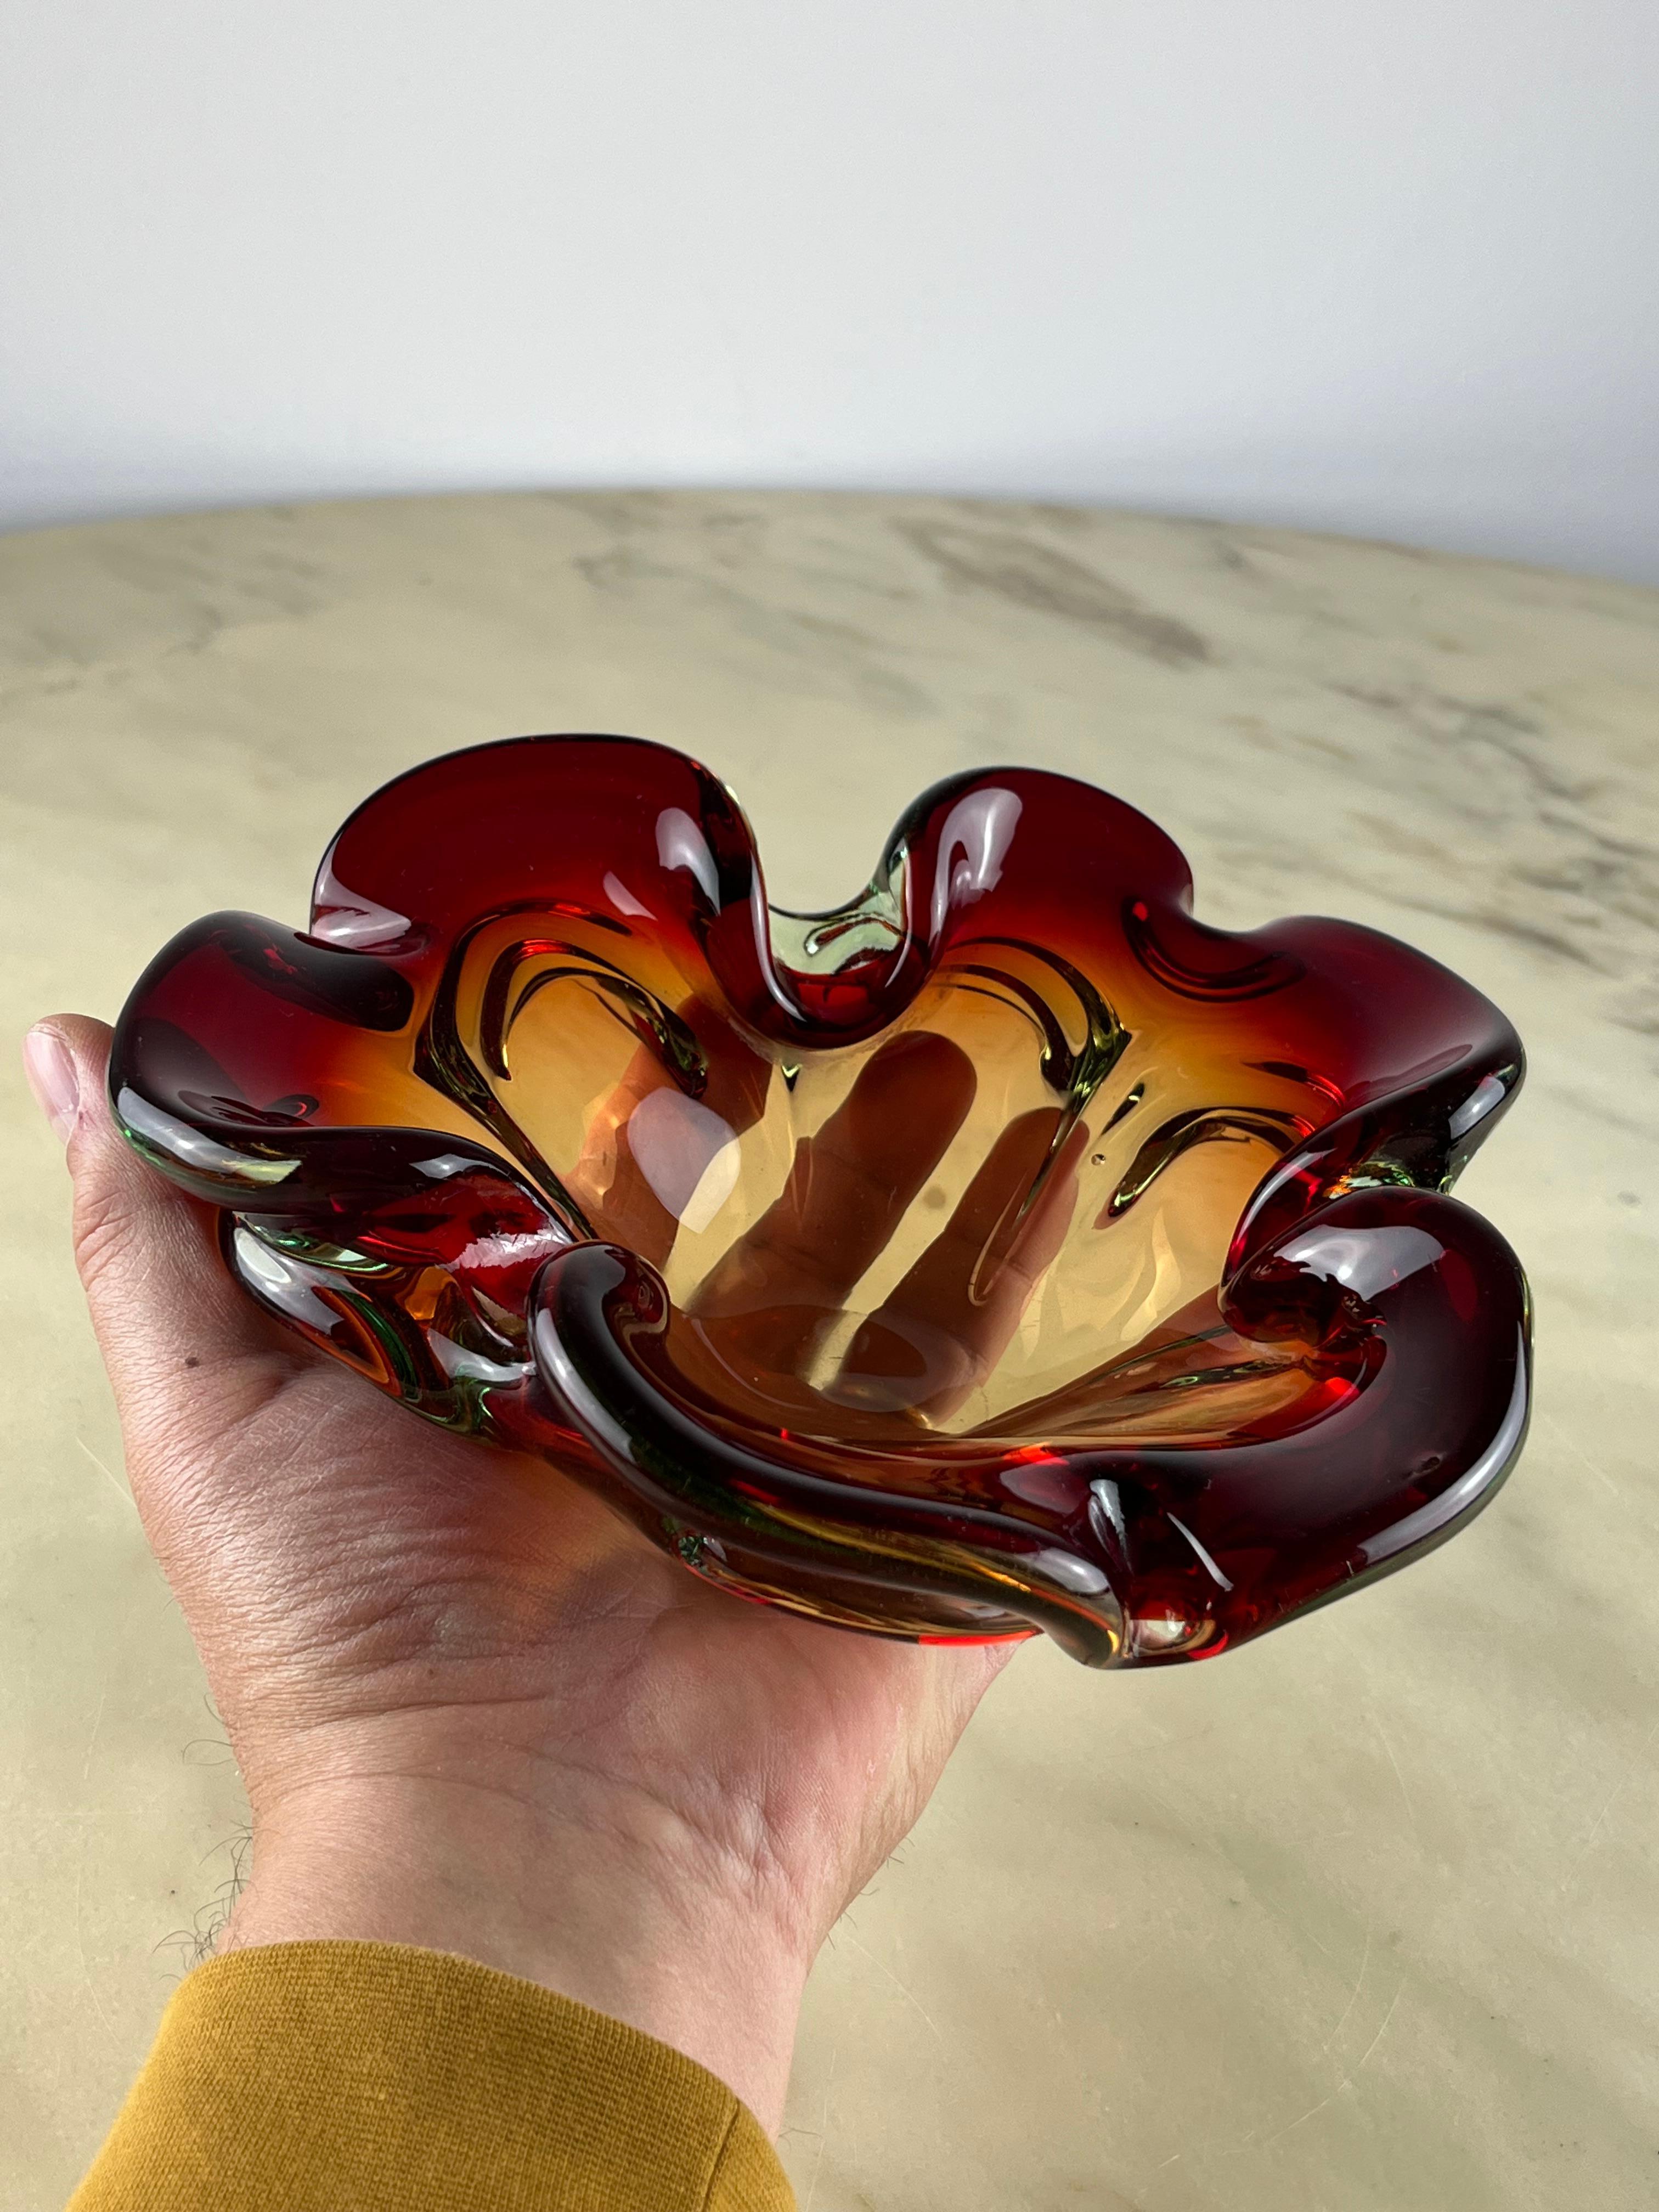 Murano submerged glass ashtray/valet tray, Italy, 1960s.
Family item, it has small signs of aging and use.